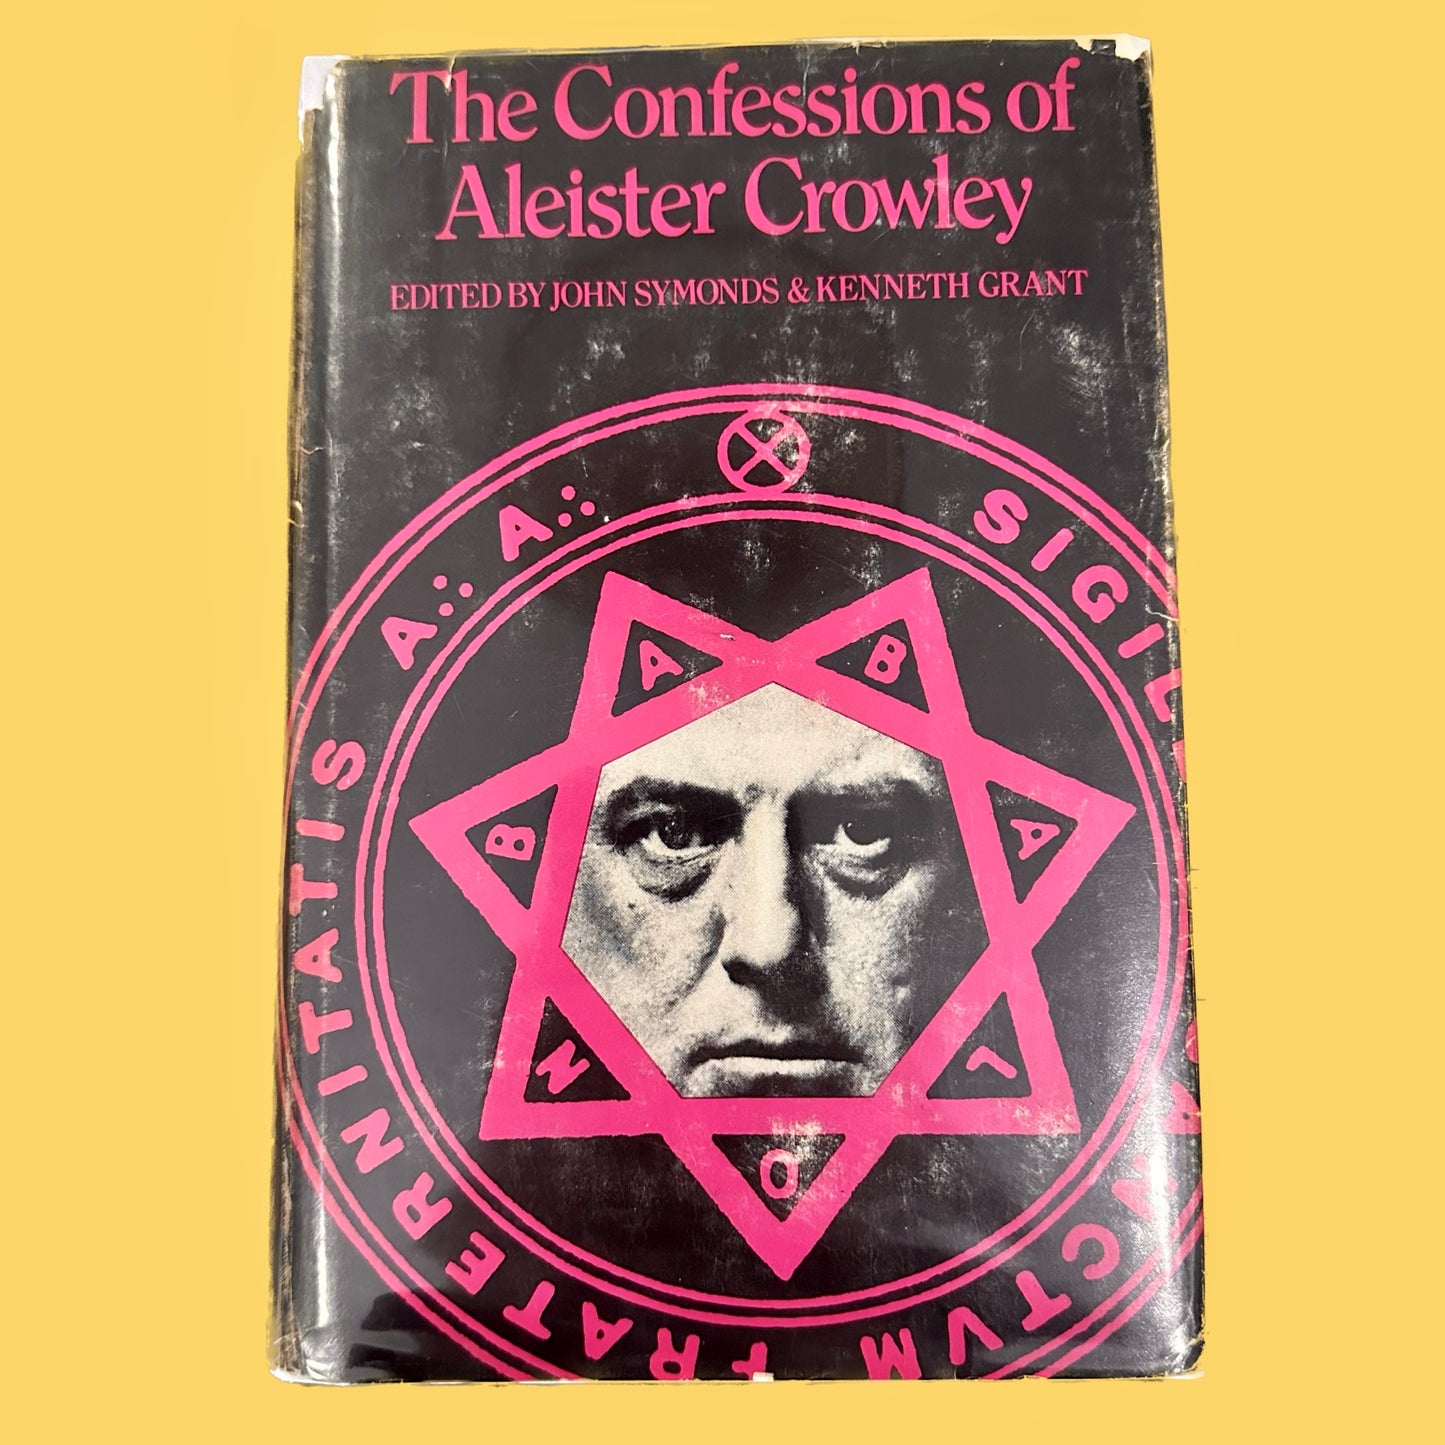 The Confessions of Aleister Crowley by Aleister Crowley, 1969